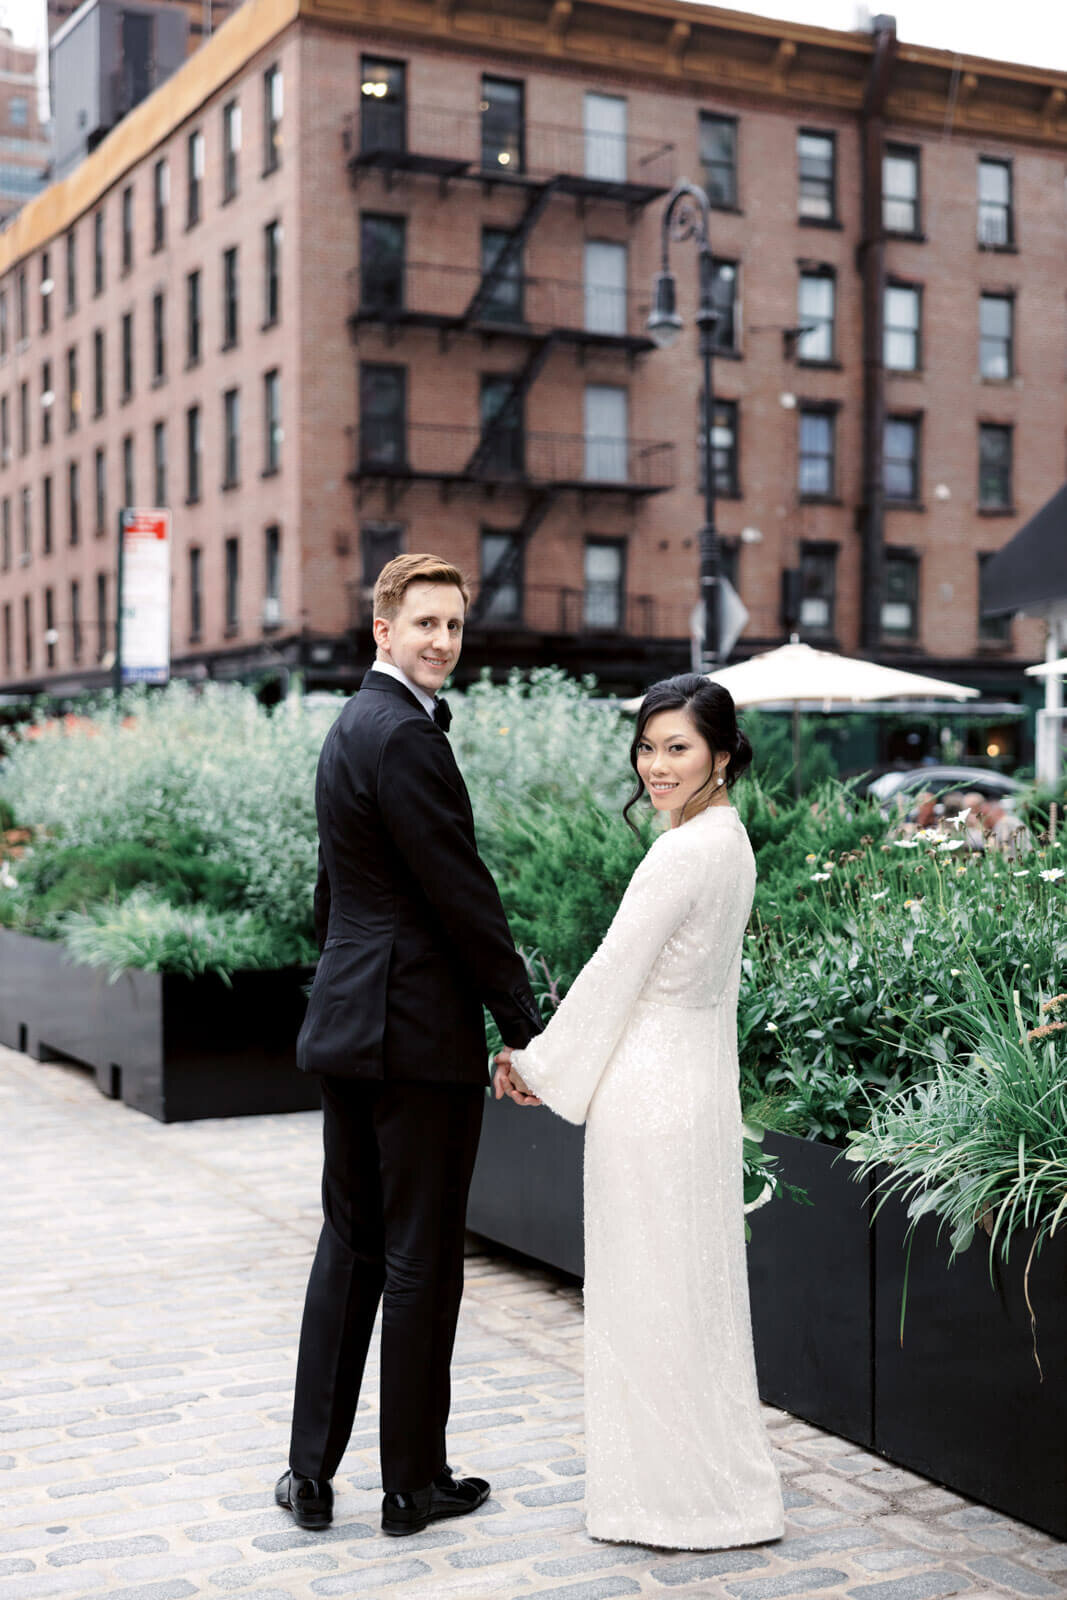 The bride and groom are holding hands, with some plants and a red brick building in the background in West Village, NYC.